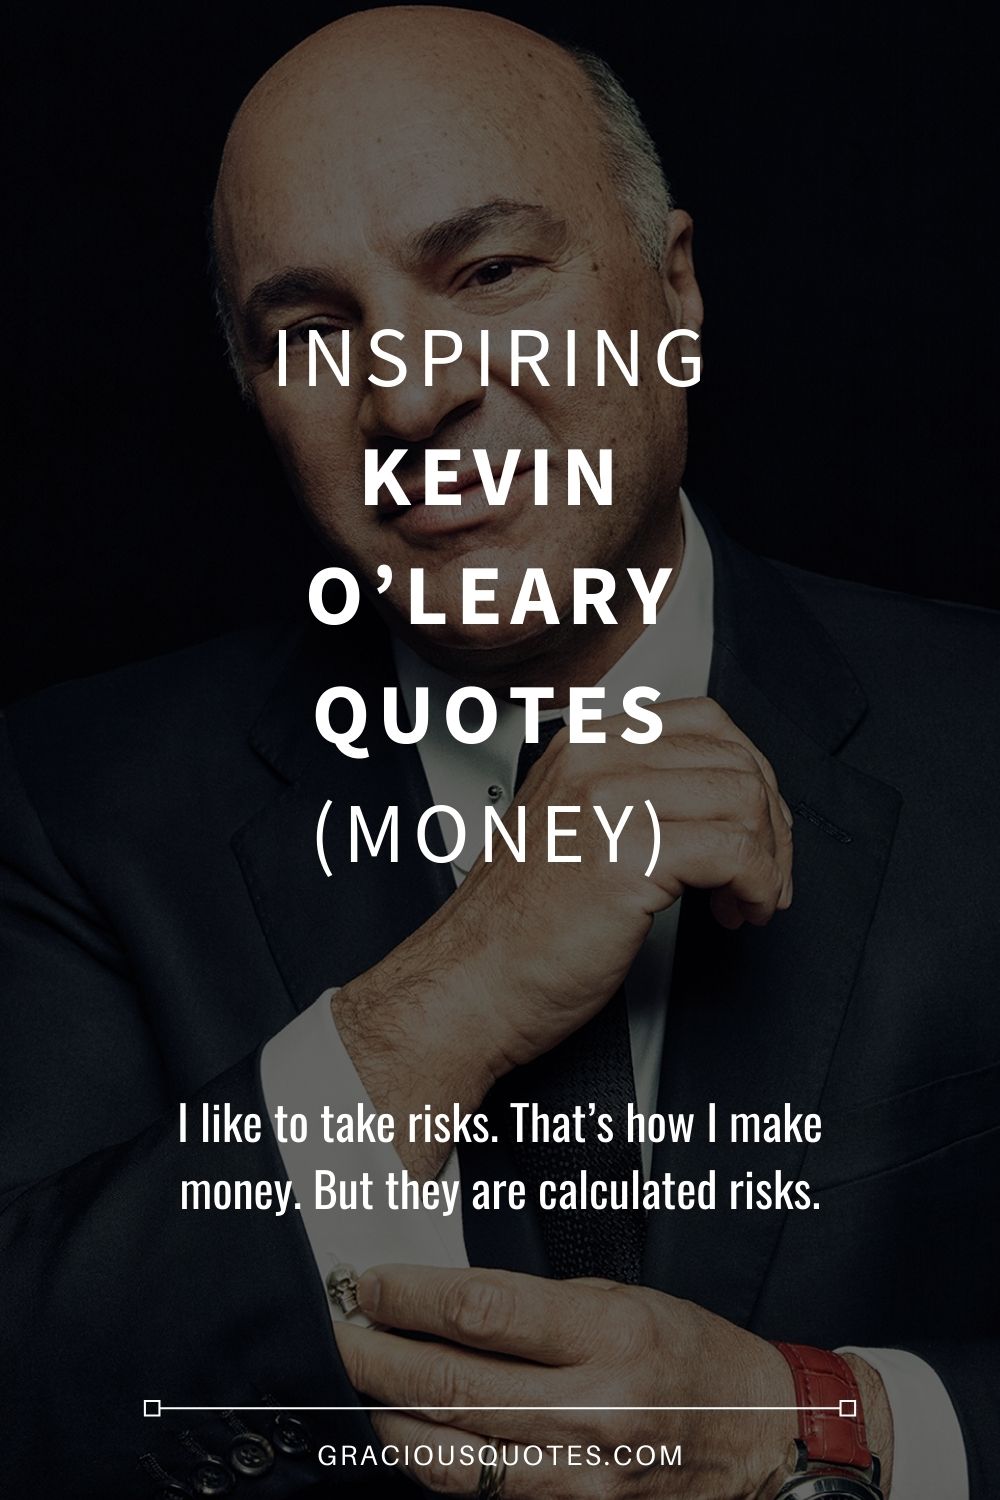 Inspiring Kevin O’Leary Quotes (MONEY) - Gracious Quotes